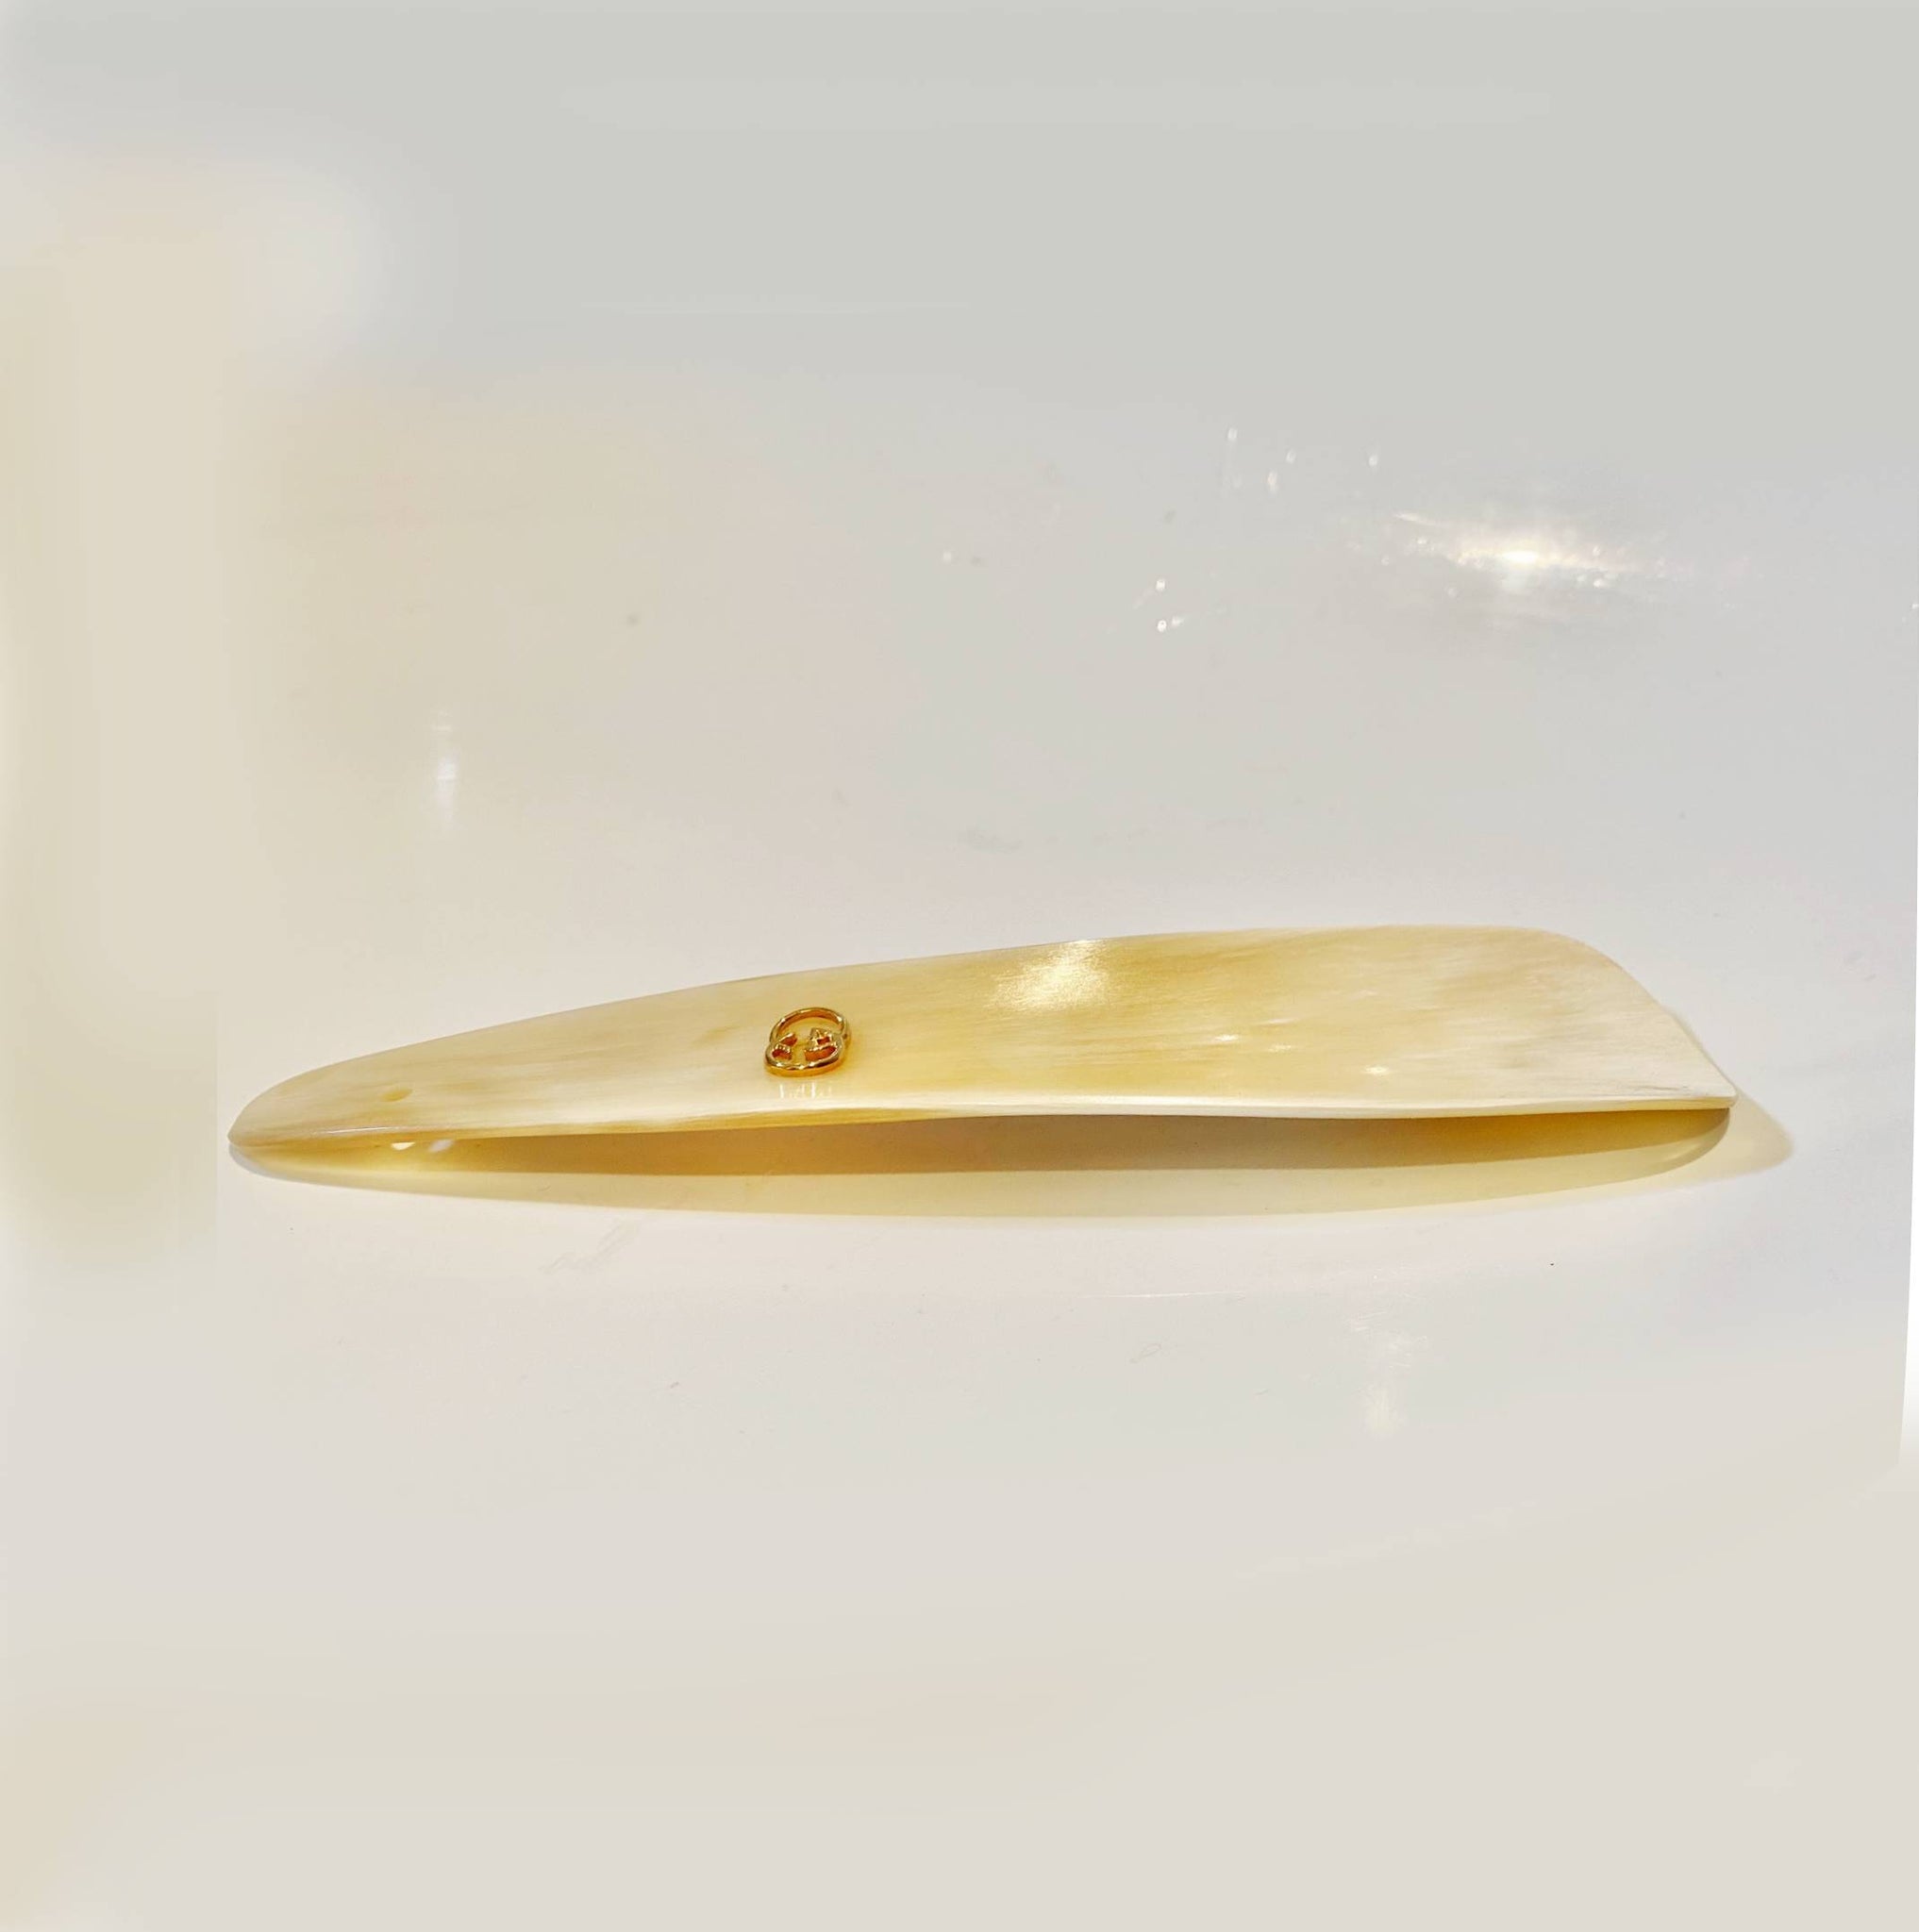 1960s GUCCI SHOE HORN - style - CHNGR